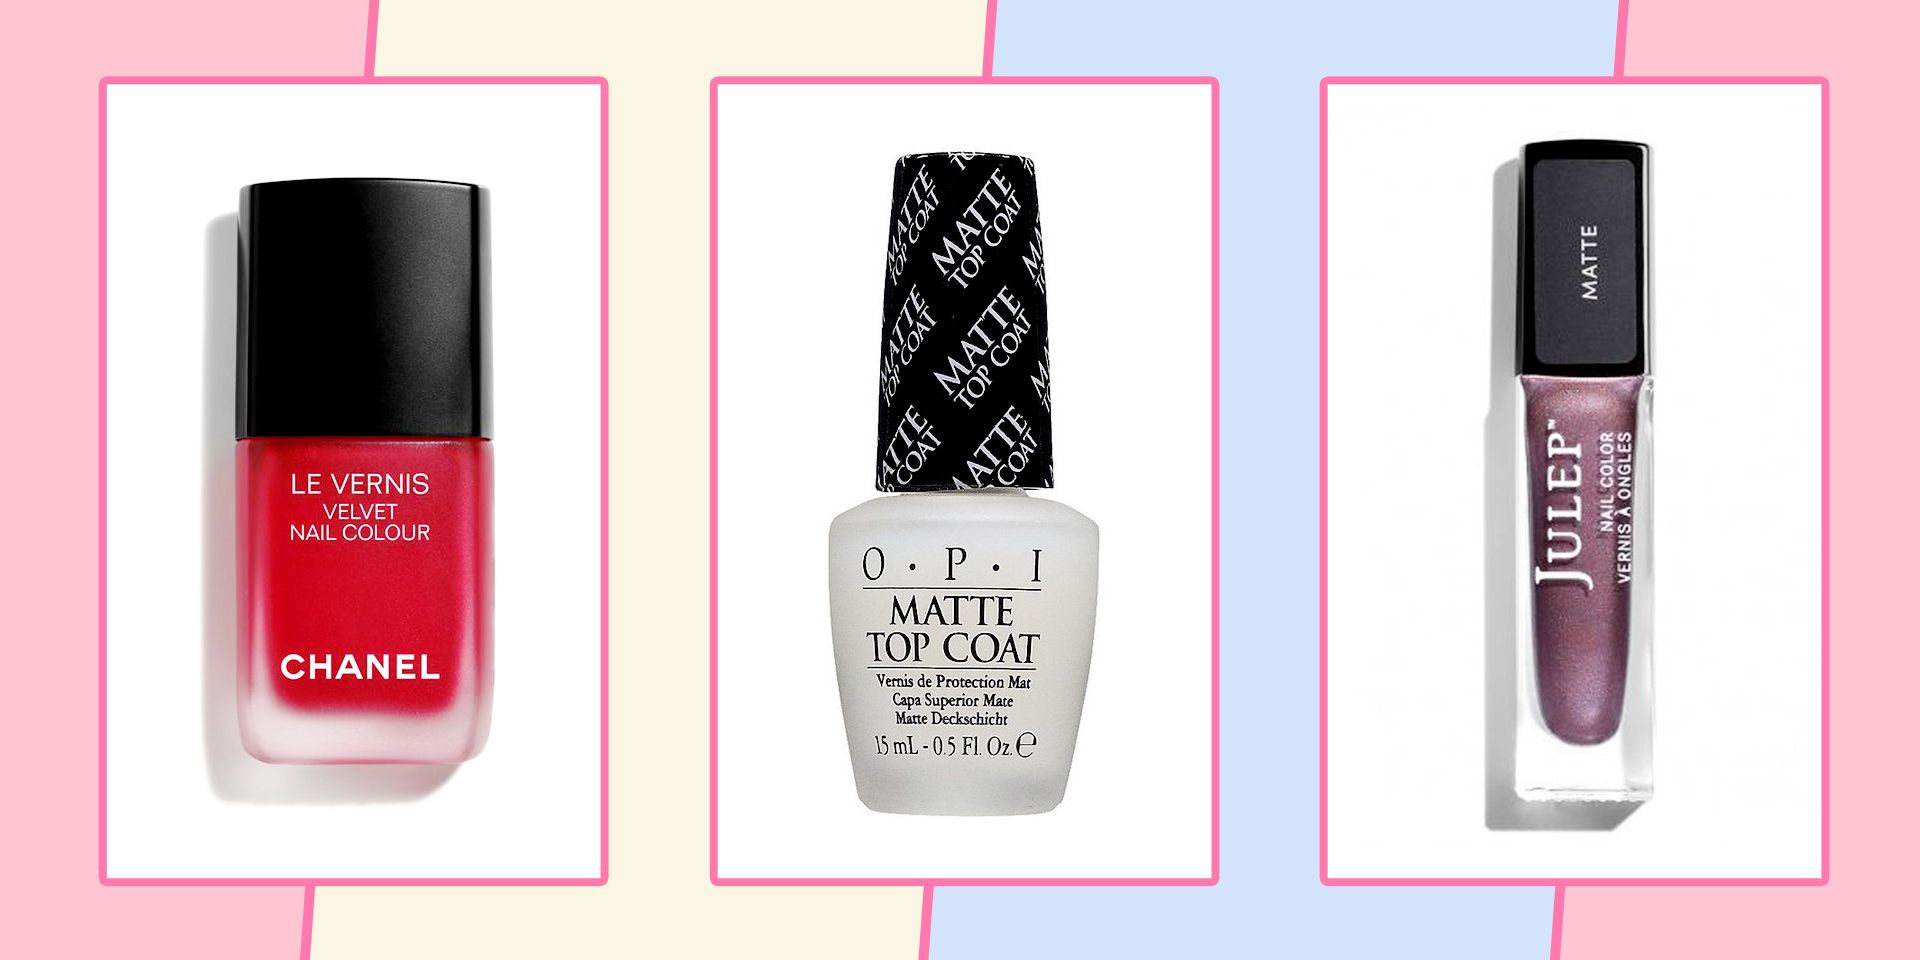 6 Best Matte Nail Polishes - Fun Matte Colors to Buy